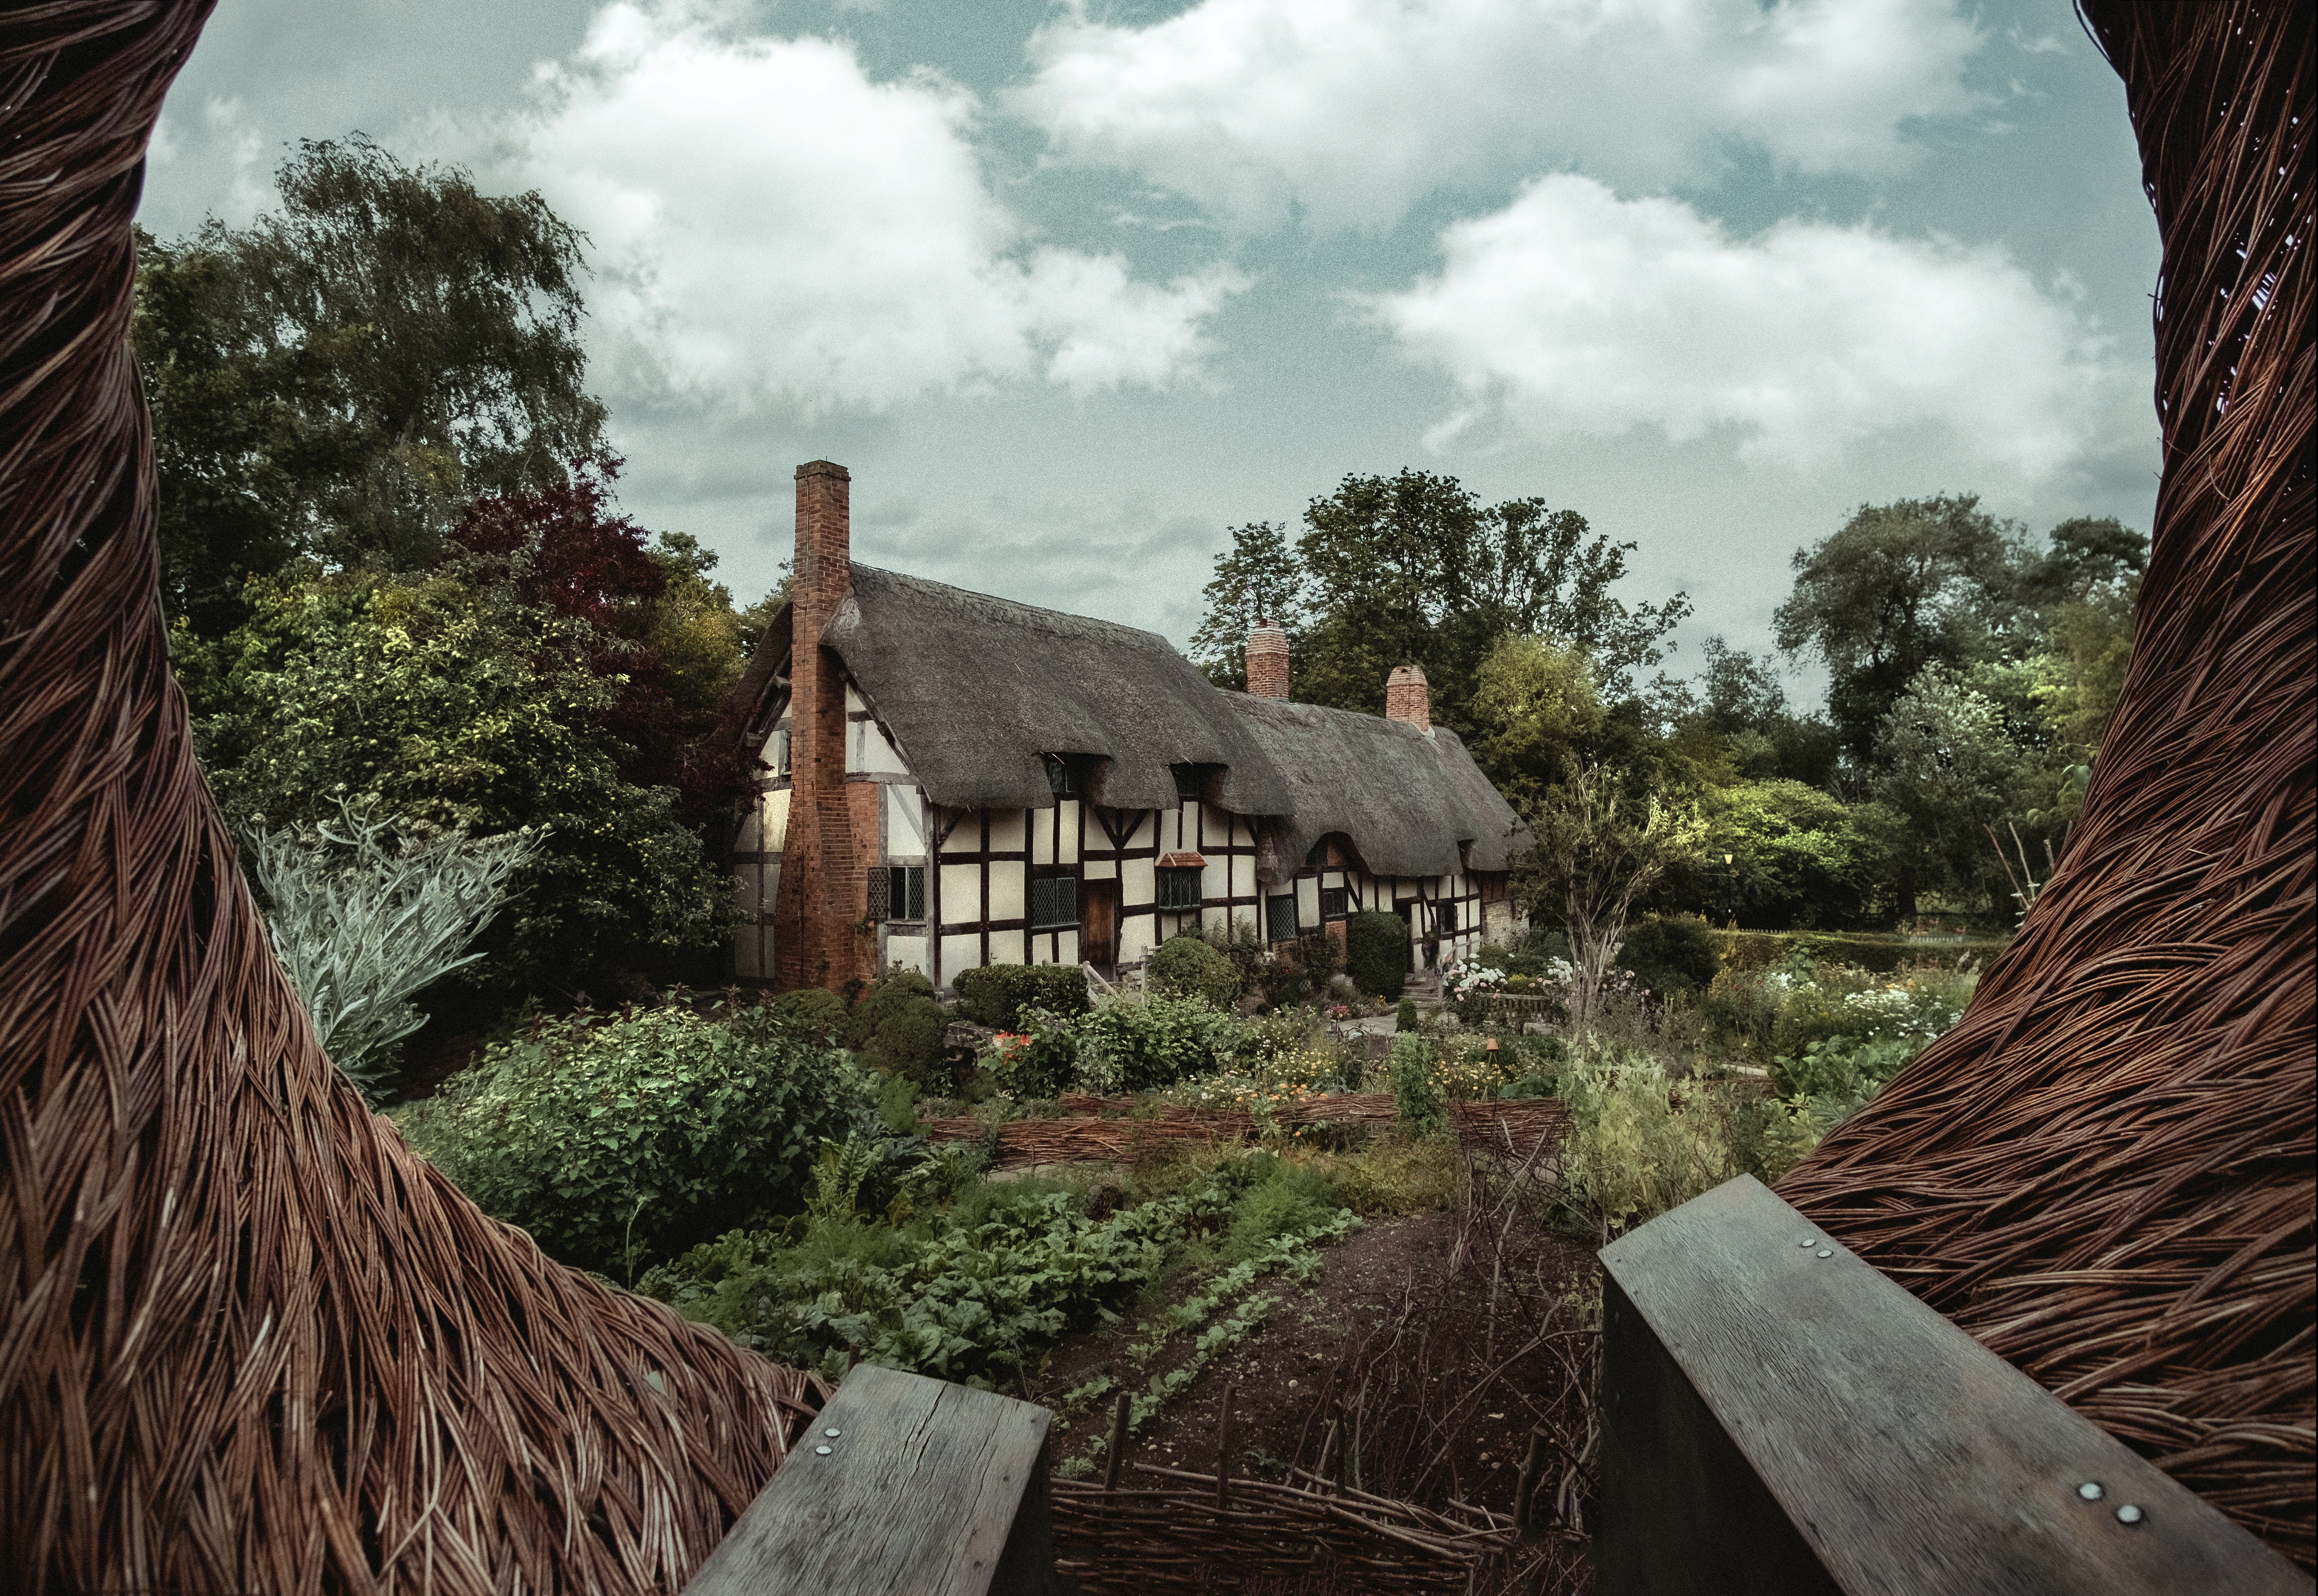 Anne Hathaway’s famous thatched cottage just outside Stratford upon Avon. Image: Zoltan Tasi / Unsplash